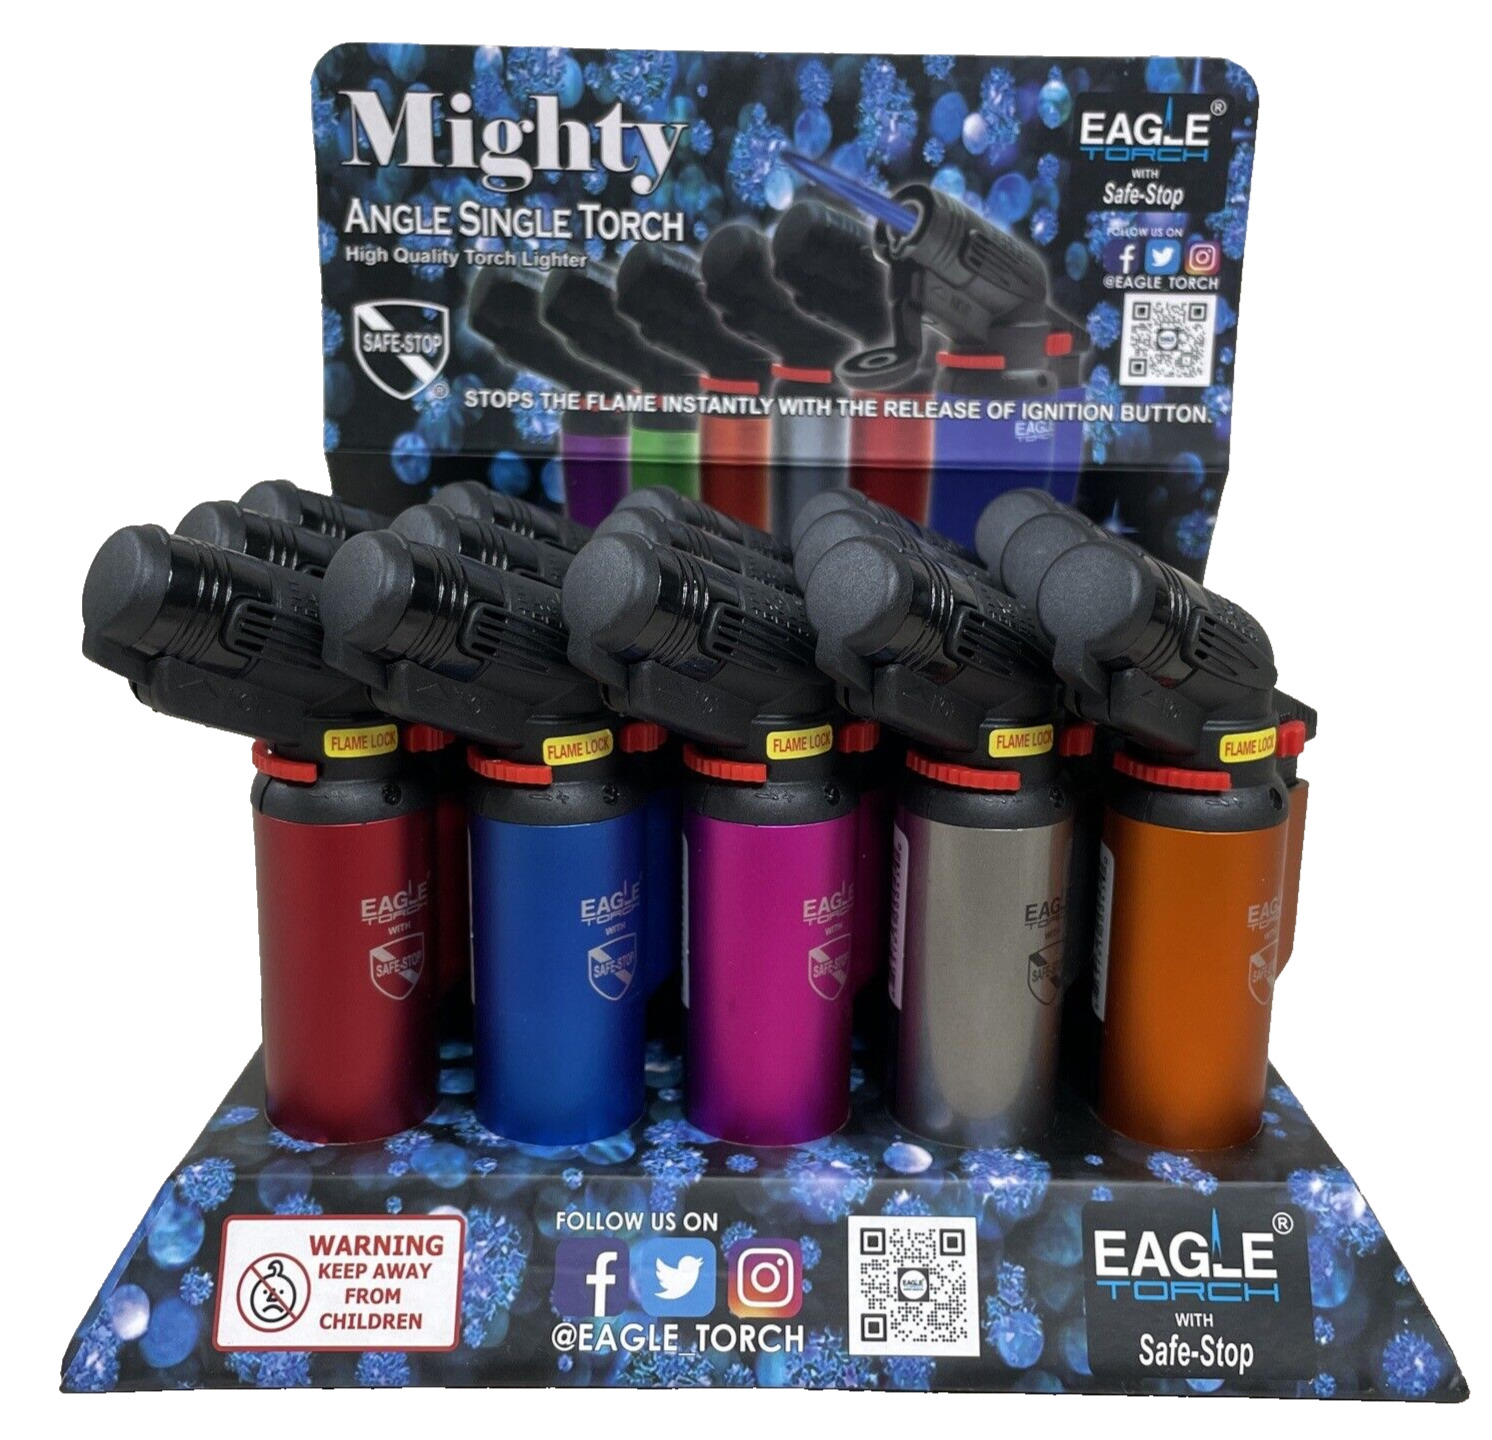 Mighty Angle Single Flame Windproof Eagle Torch Jet Lighters New 15 Pack Lot